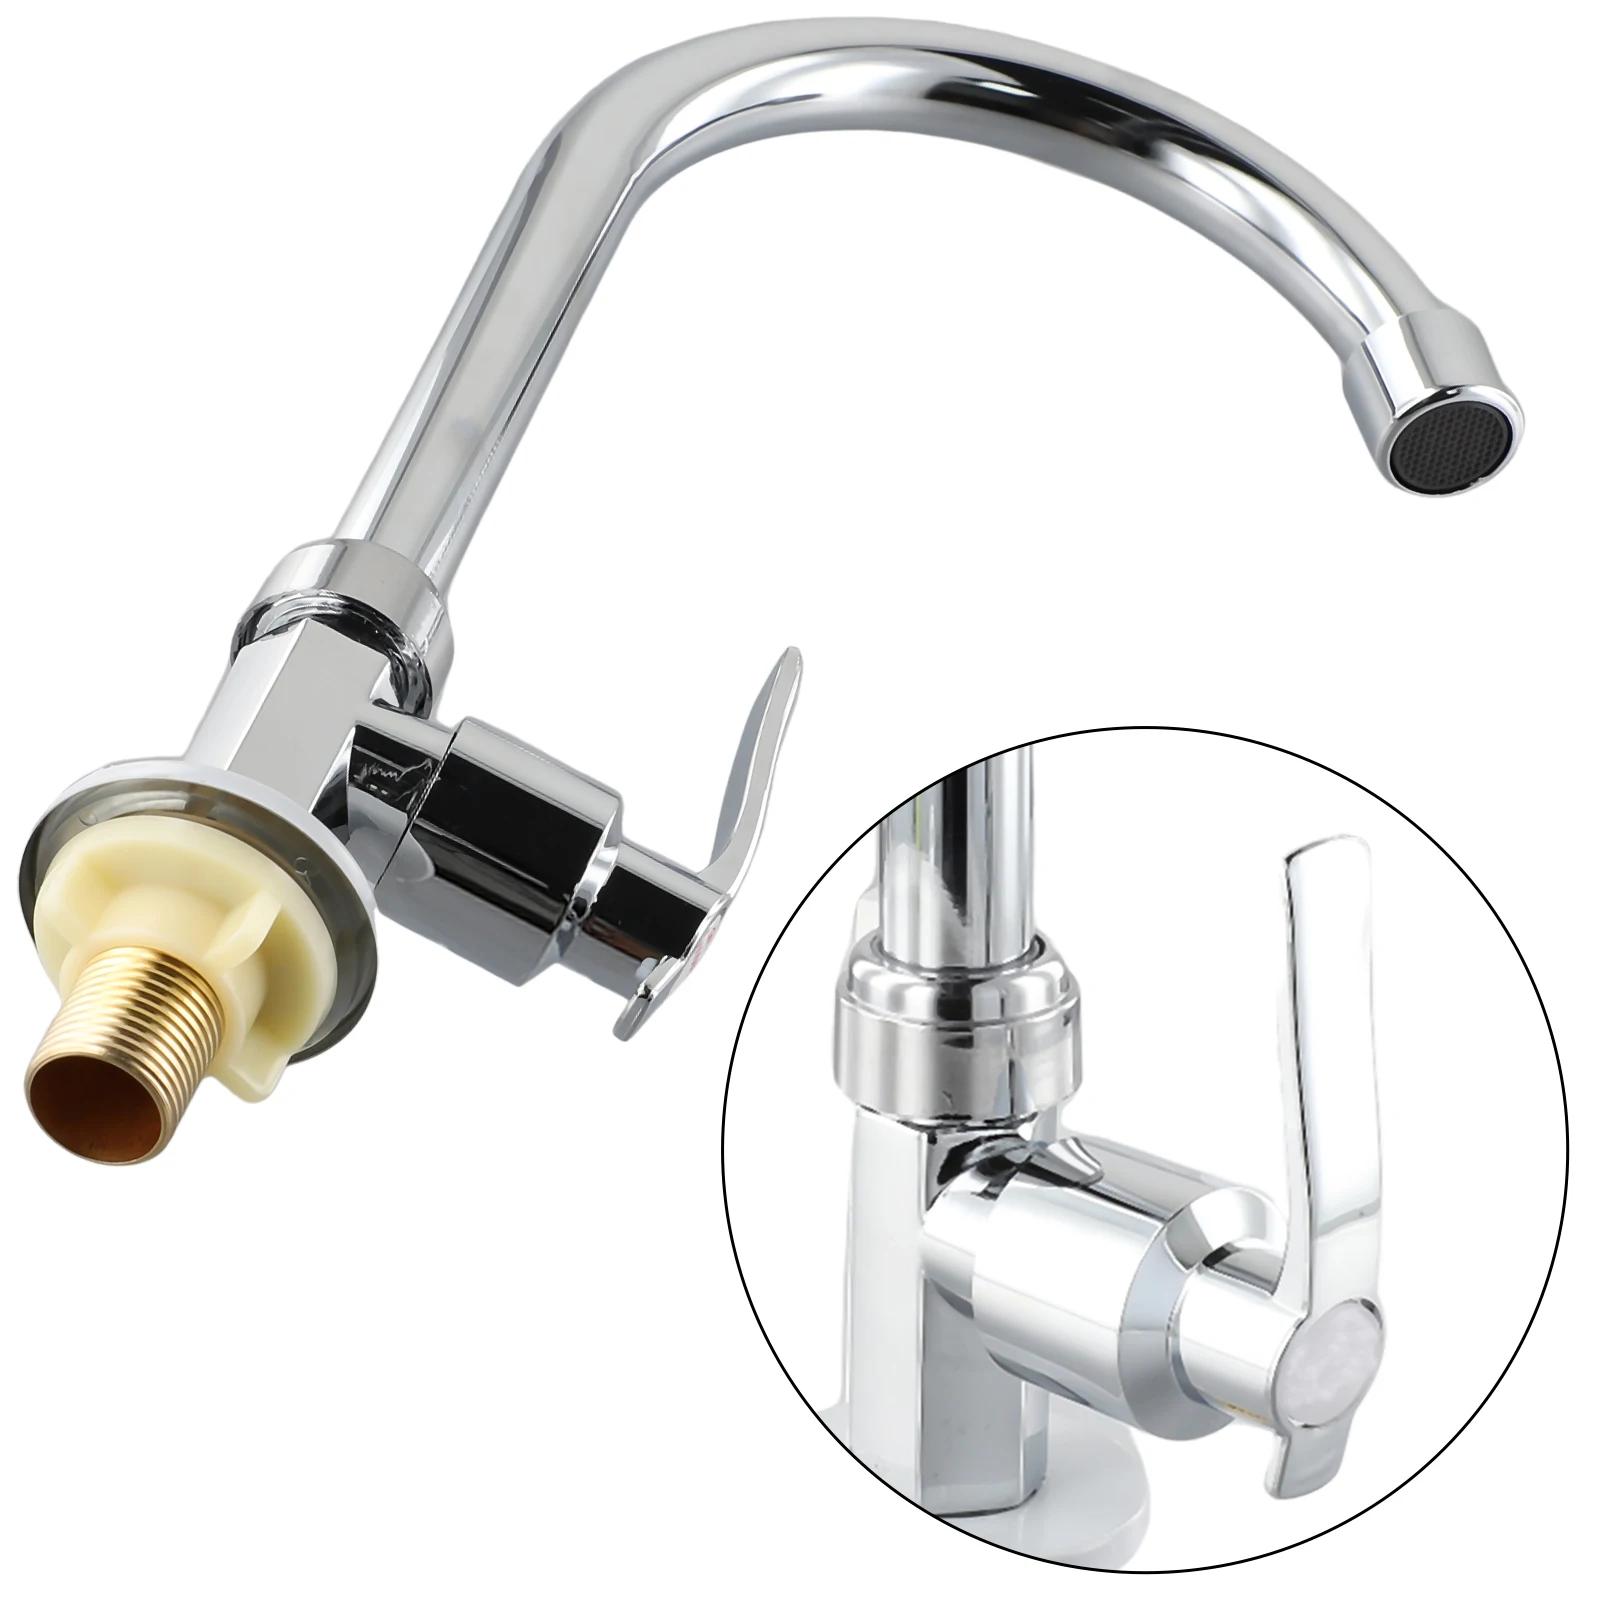 Kitchen Sink Mixer Taps Swivel Spout Single Lever Single Cold Water Tap Modern Chrome Faucet Kitchen Home Tools Accessories 4